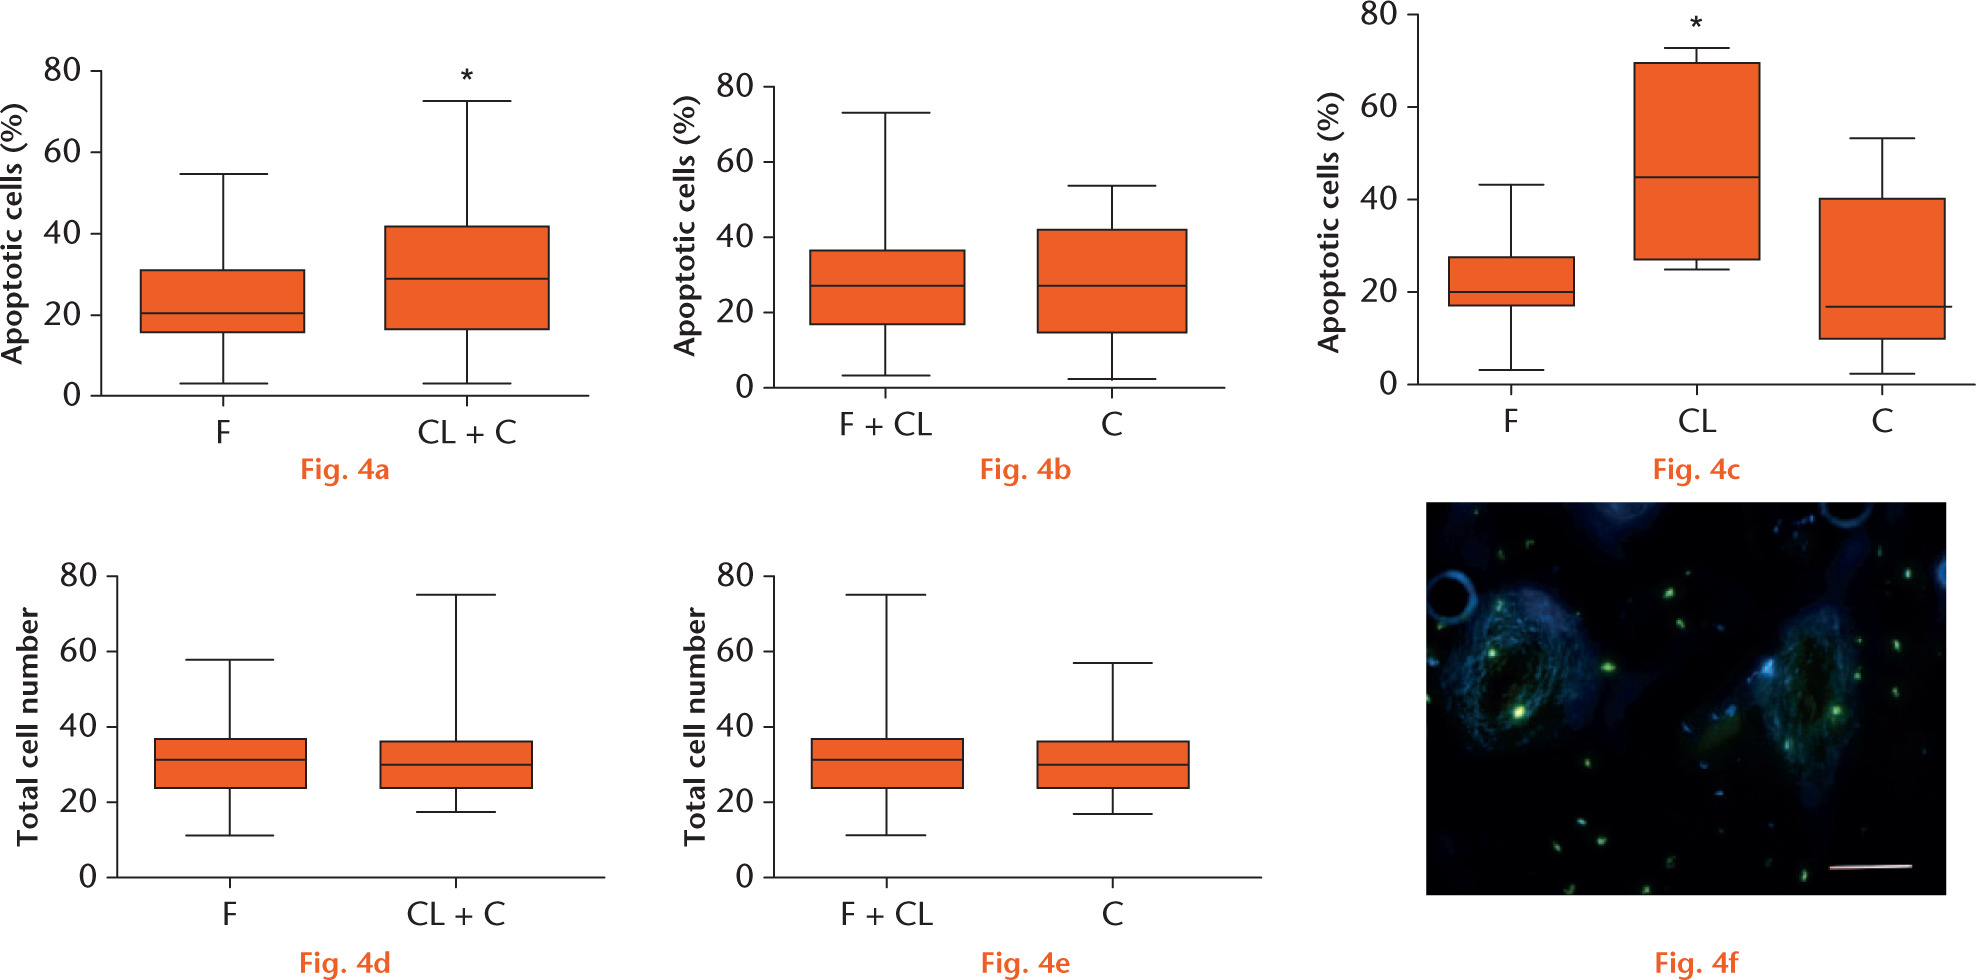  
            Graphs showing: a) quantification of apoptosis within osteocytes in nonfractured and fractured samples; b) raced and non-raced samples; and c) samples from the sagittal ridge. There is a statistically significant difference in the numbers of apoptotic cells (p < 0.05) between fractured and nonfractured samples (a) and in the numbers of apoptotic cells on the sagittal ridge, with a significant increase in apoptotic cells in the contralateral limb samples (c). No difference was recorded in the numbers of osteocytes in the samples d) and e). f) Representative microscope image of a fluorometric TUNEL apoptosis analysis. Blue stain shows live cell nuclei, green stain shows apoptotic cells. Scale bar 100 μm. F, fractured bones; CL, contralateral bones, C, control bones.
          